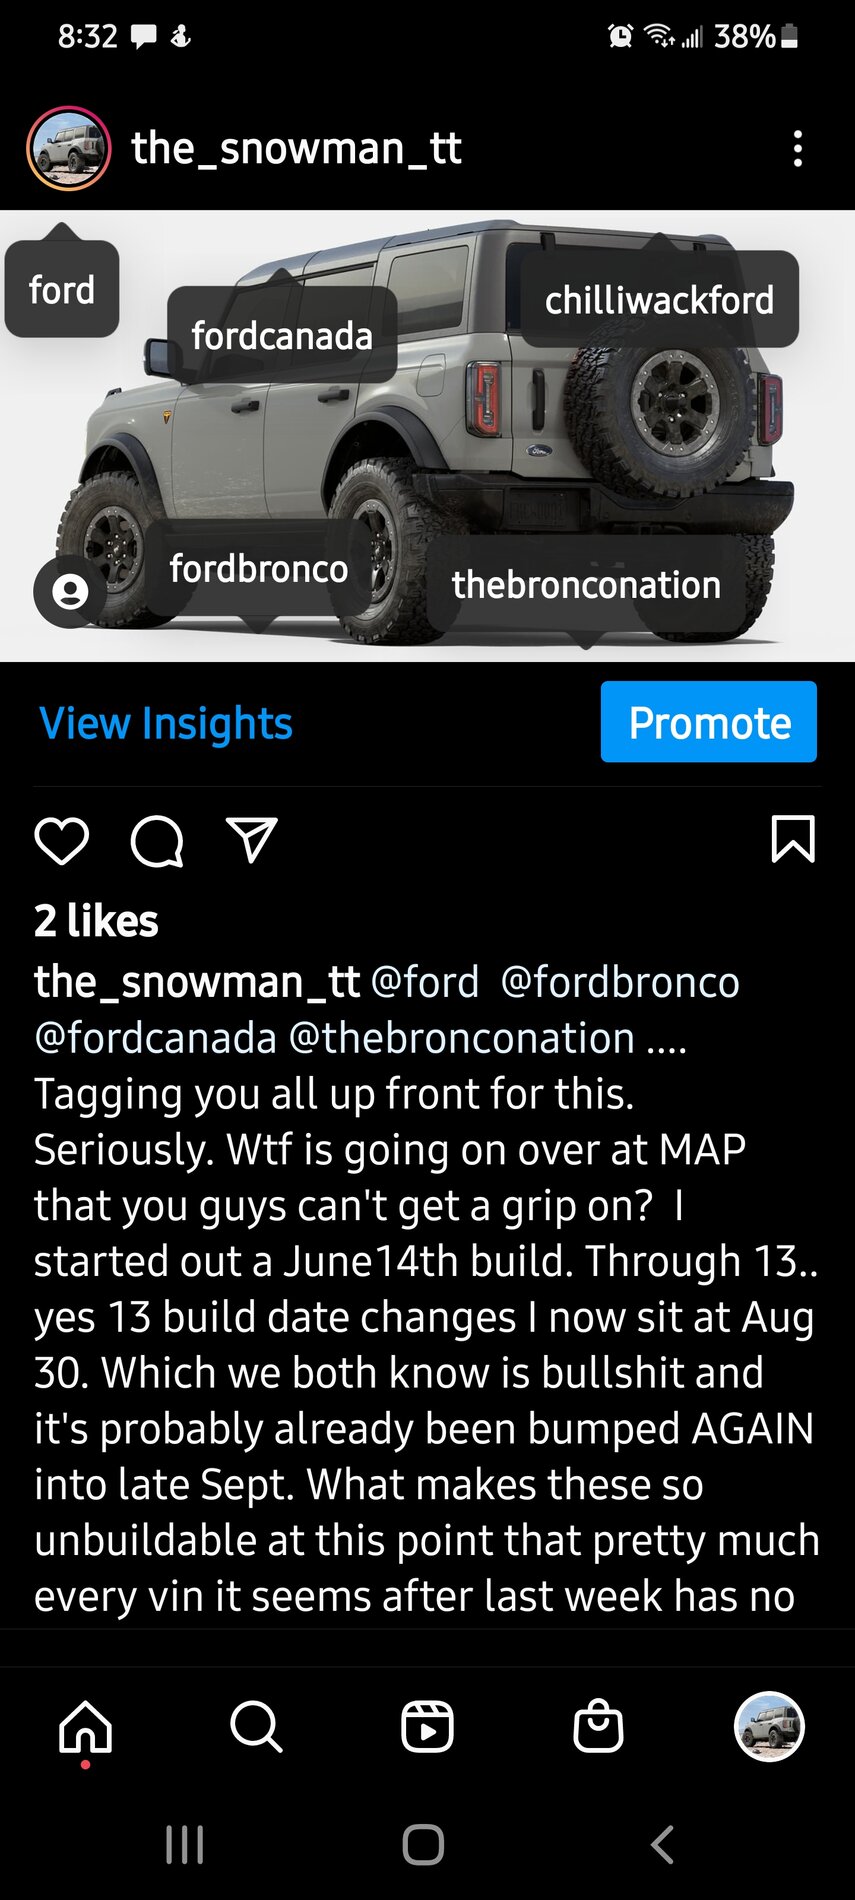 Ford Bronco Build Date Pushed Email Received 8/7 Screenshot_20210807-203222_Instagram